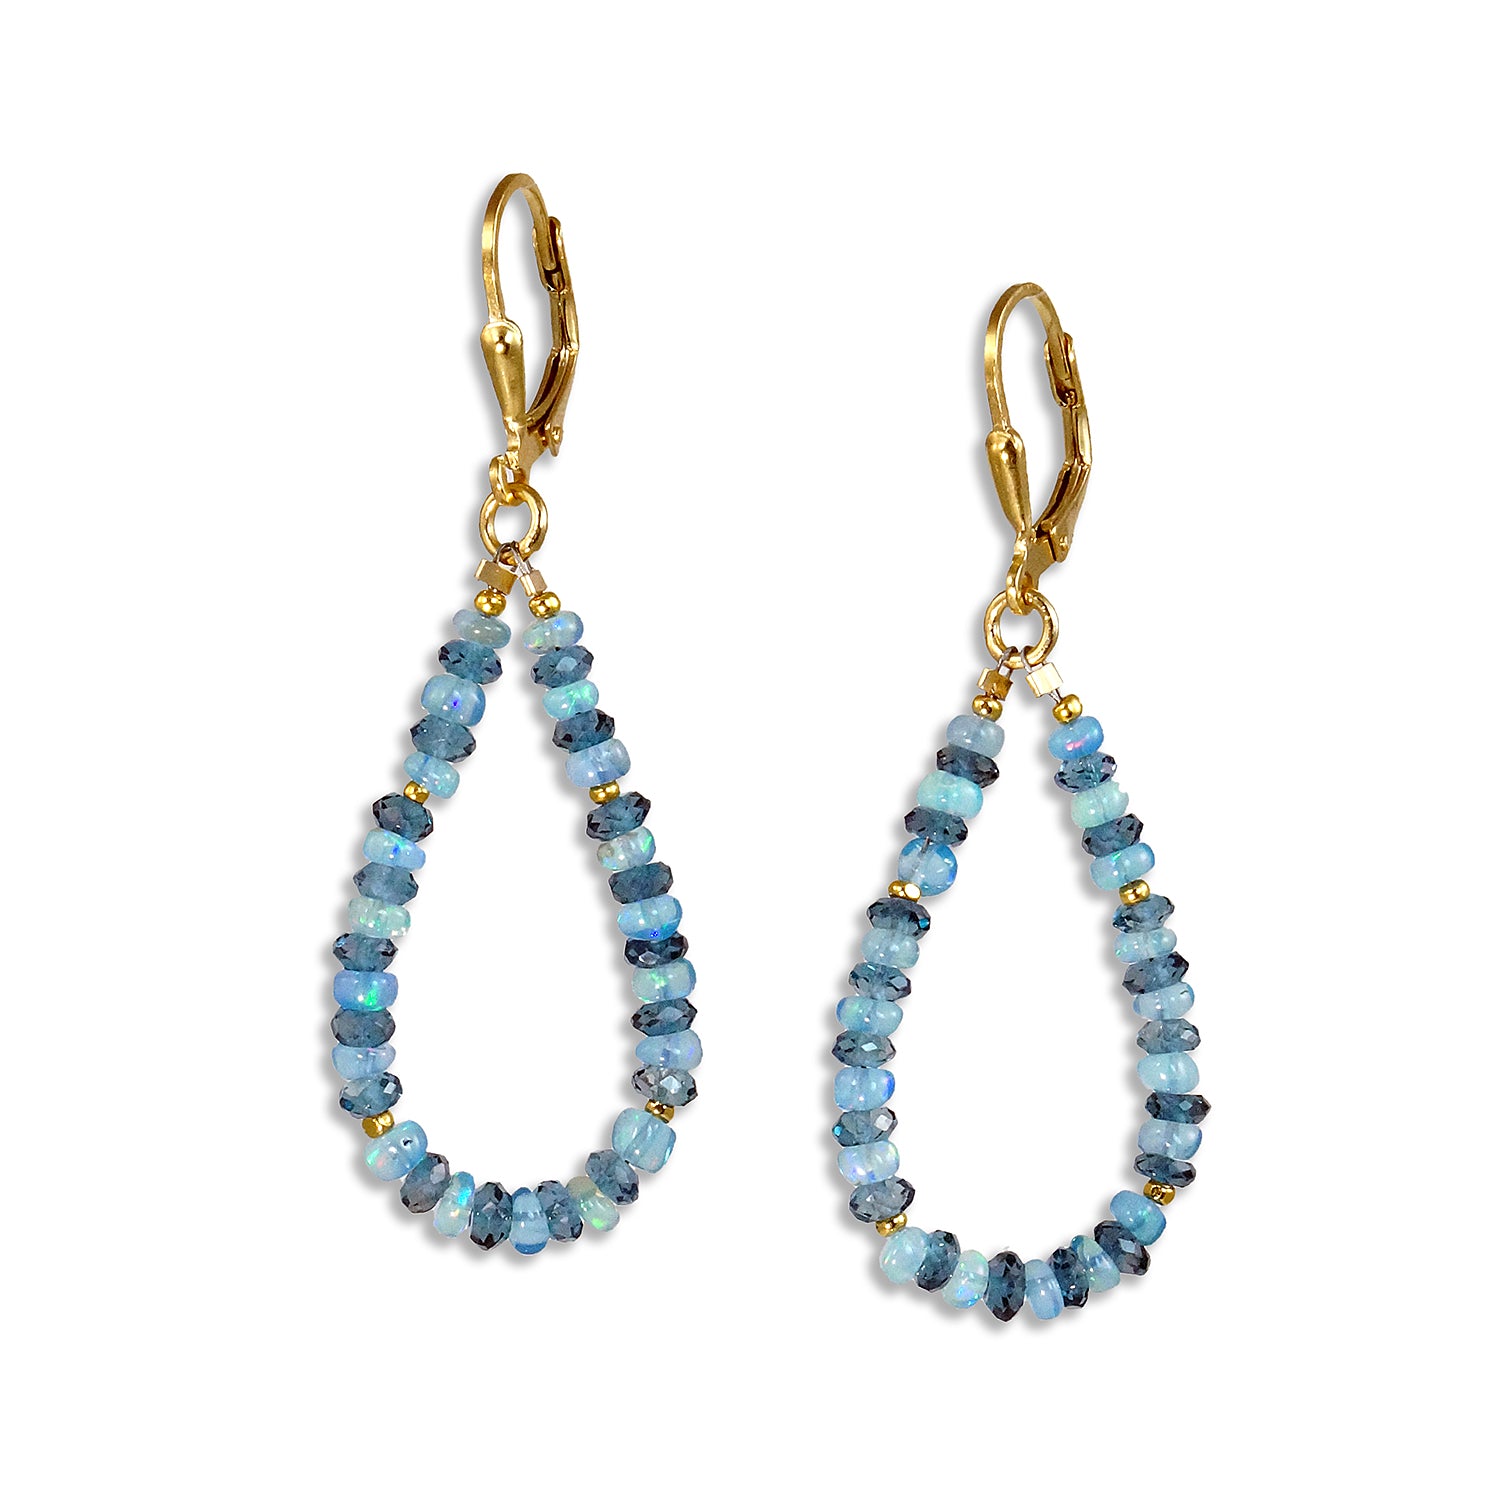 Gold Leverback Earrings with Blue Opal and London Blue Topaz